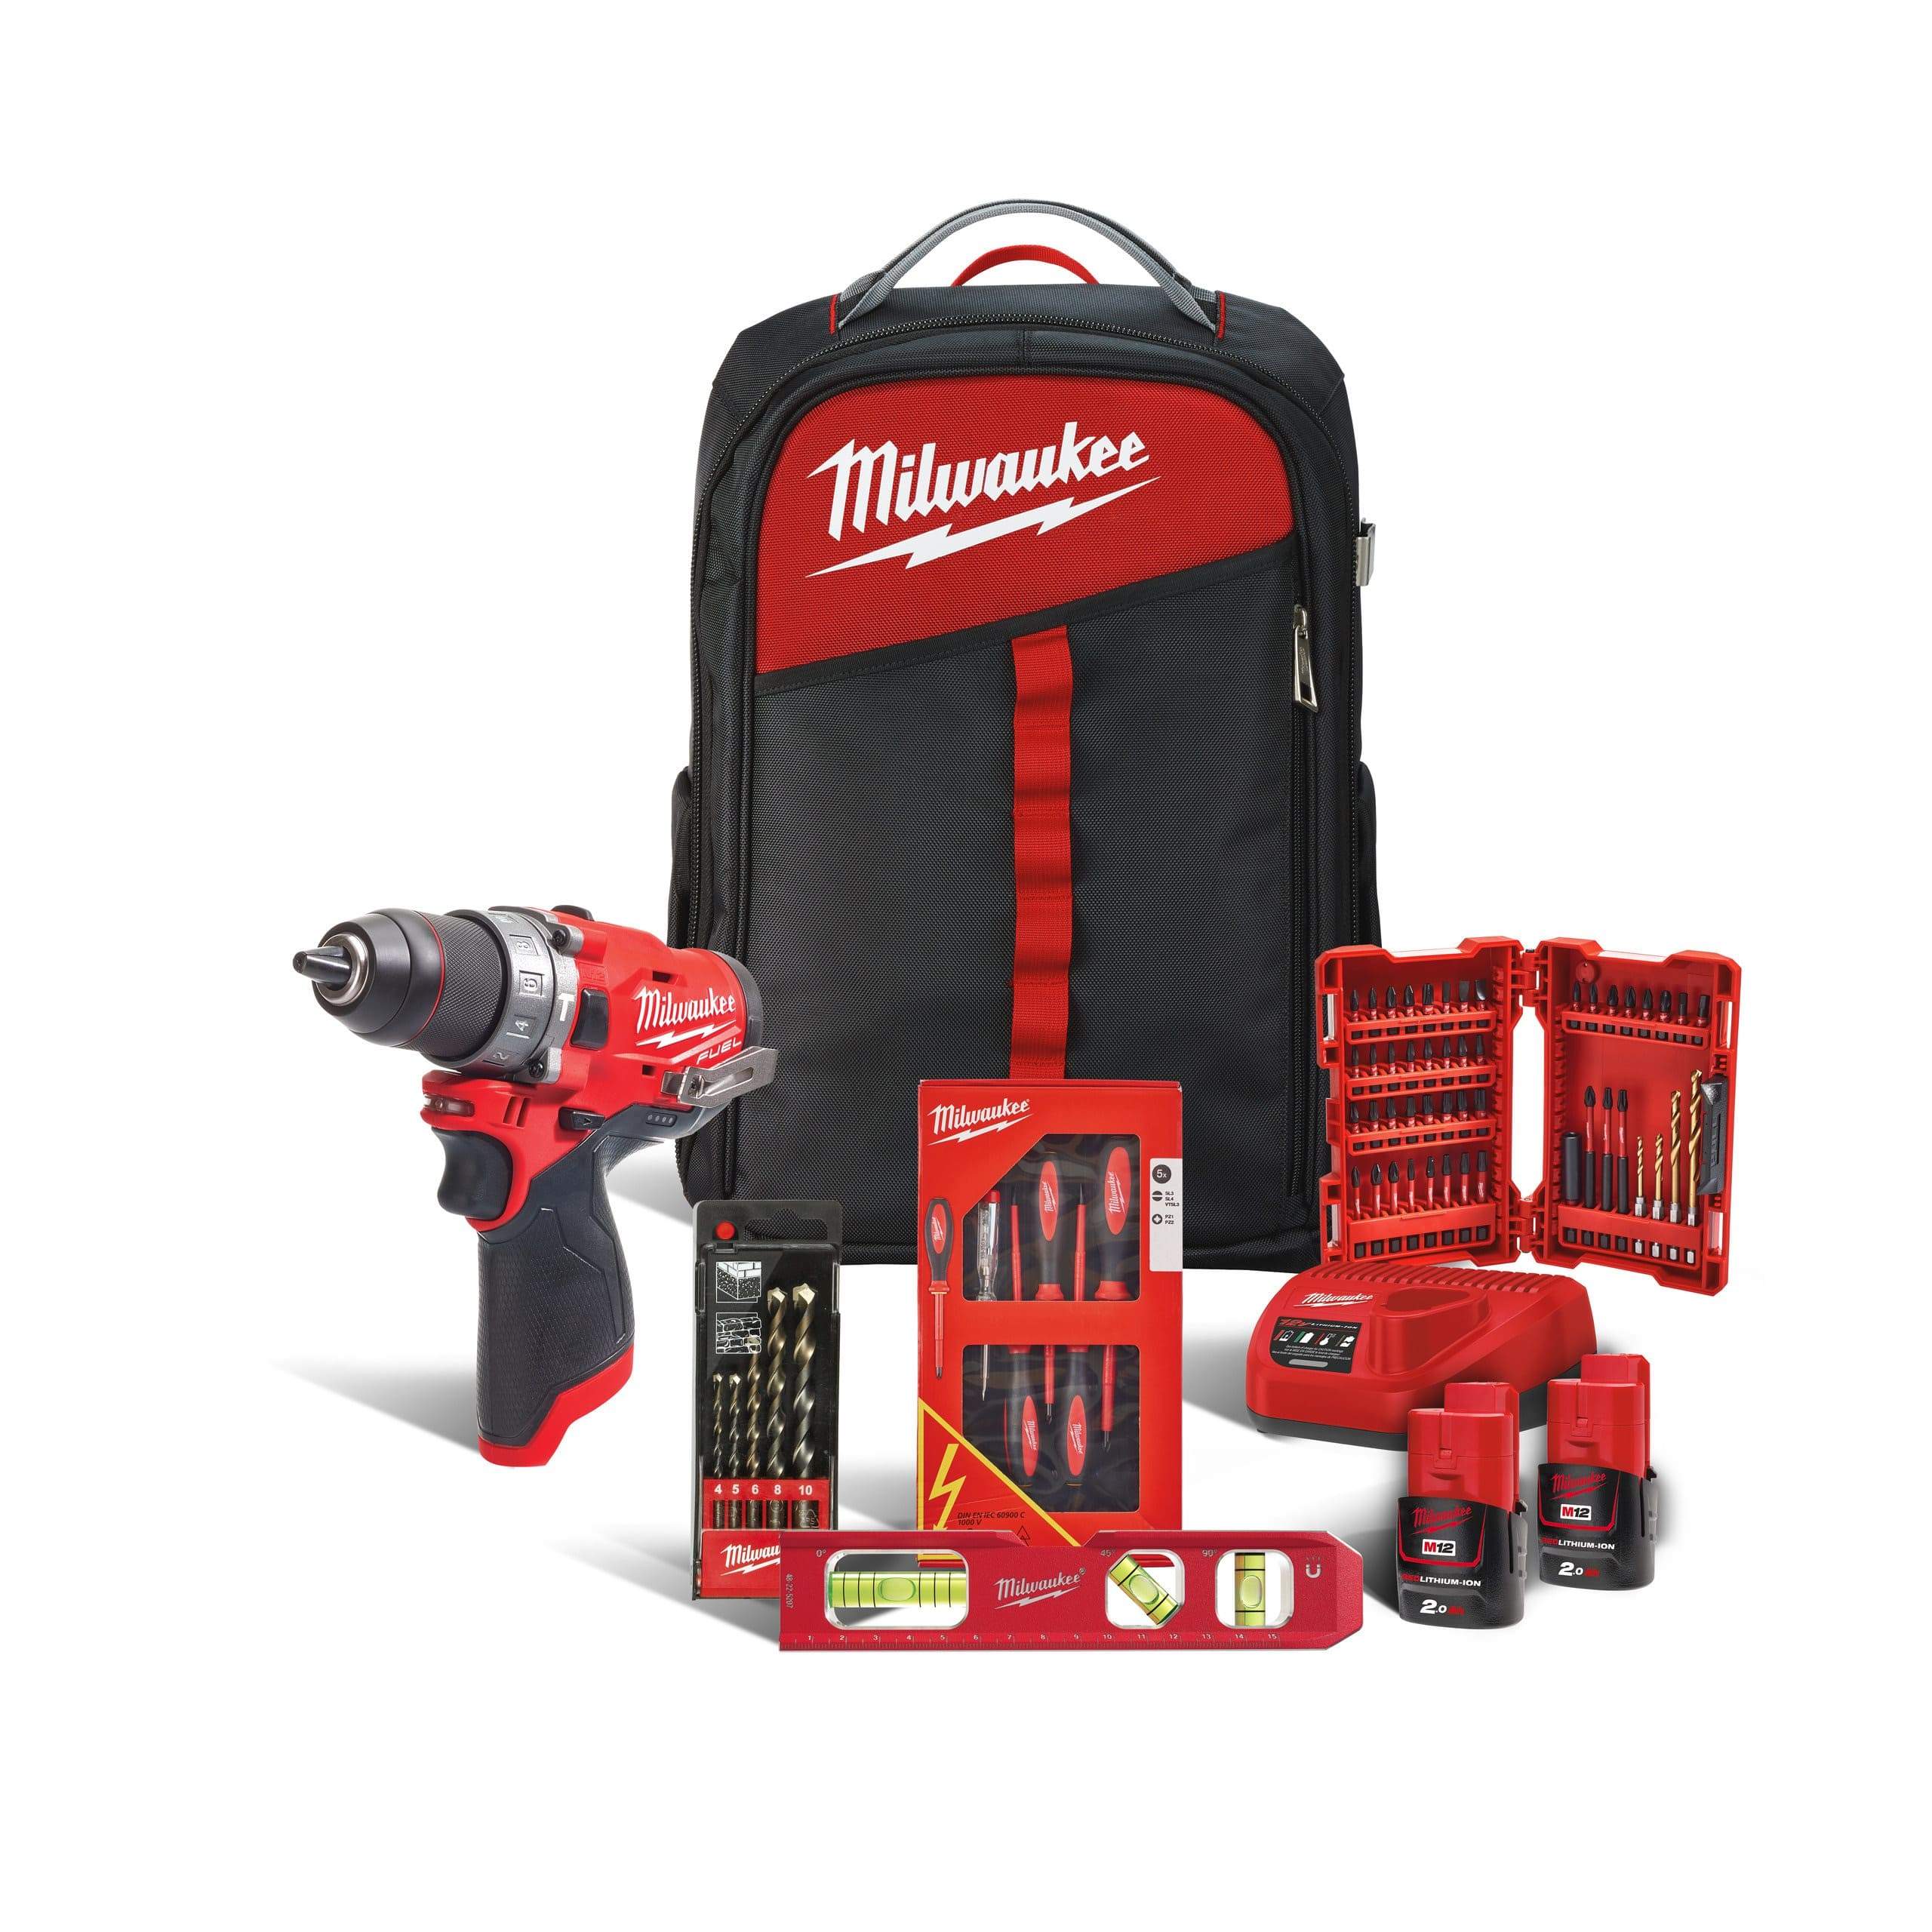 Milwaukee M12™ Portable Productivity - Electrician Tradesman Kit - M12 FPD-202BH | Supply Master | Accra, Ghan Tools Building Steel Engineering Hardware tool